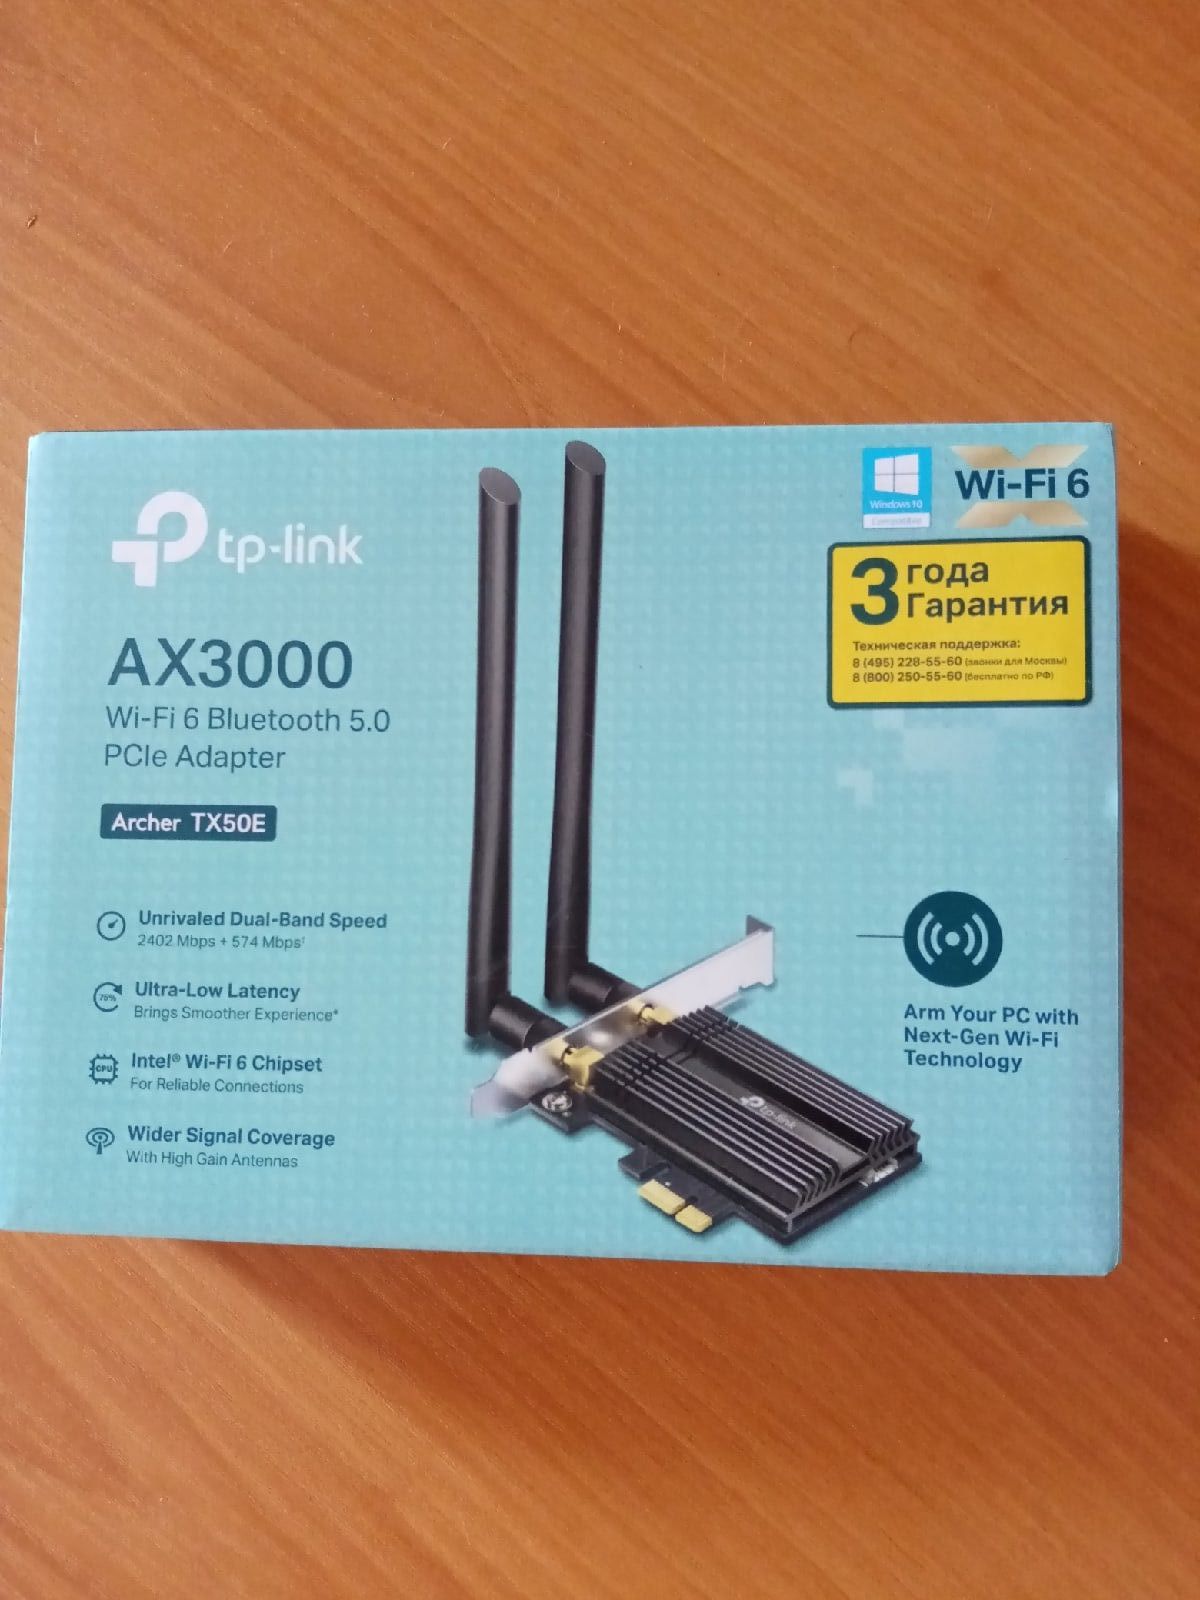 TP-LINK AX3000 Wi-Fi 6 Bluetooth 5.0 PCIe Adapter Archer TX50E  (ArcherTX50E) - The source for WiFi products at best prices in Europe - wifi -stock.com